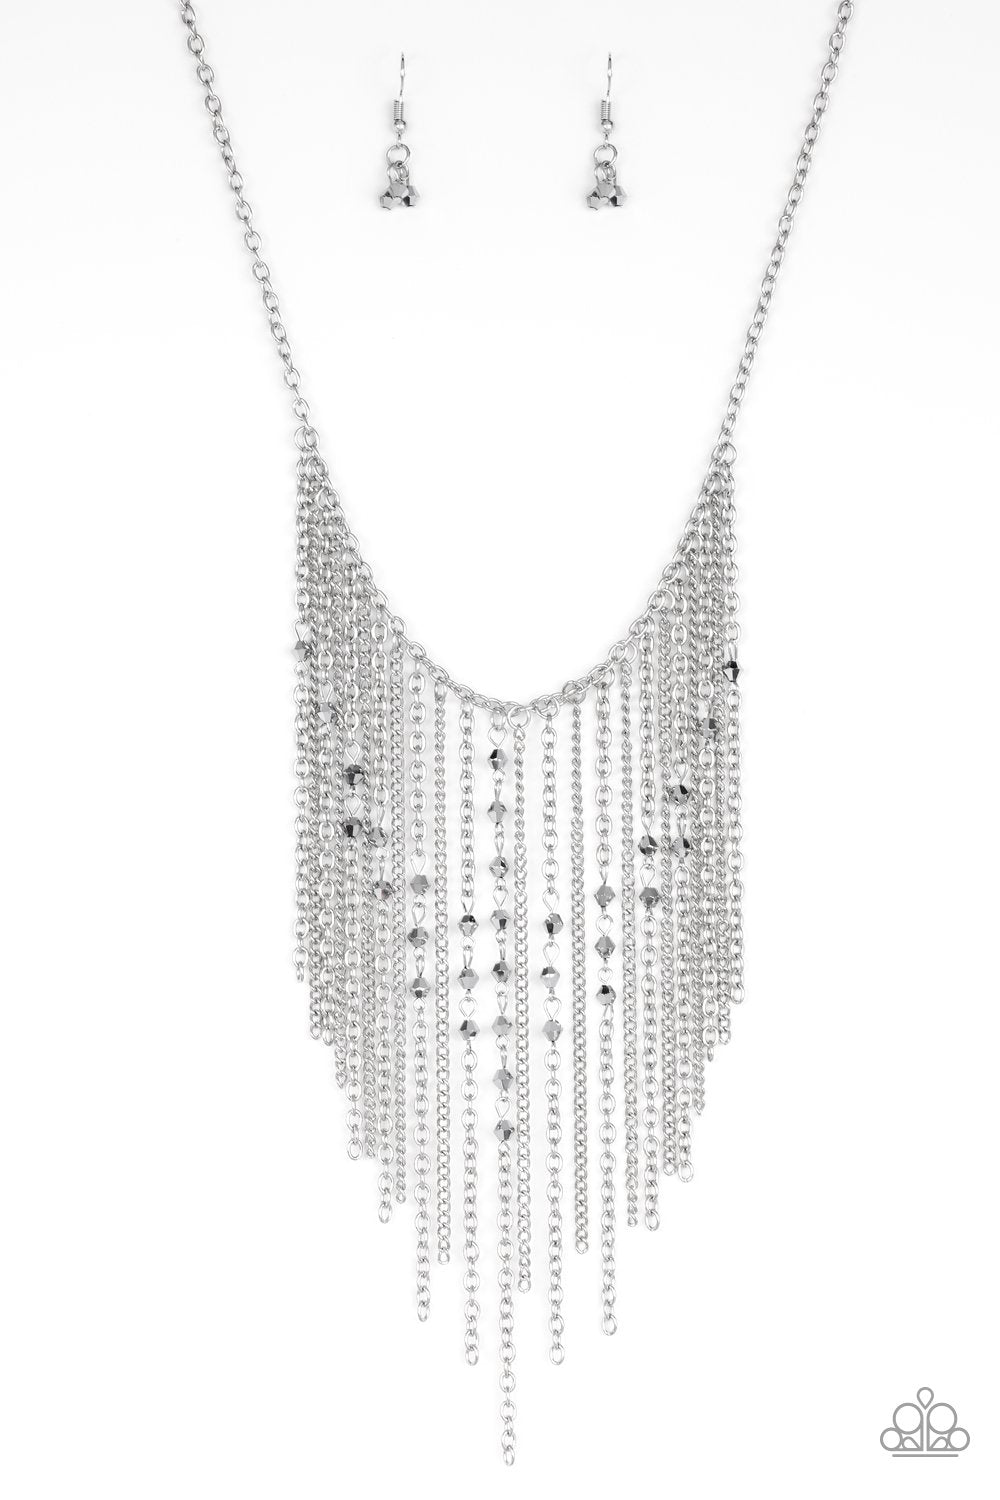 First Class Fringe Silver Necklace and matching Earrings - Paparazzi Accessories-CarasShop.com - $5 Jewelry by Cara Jewels